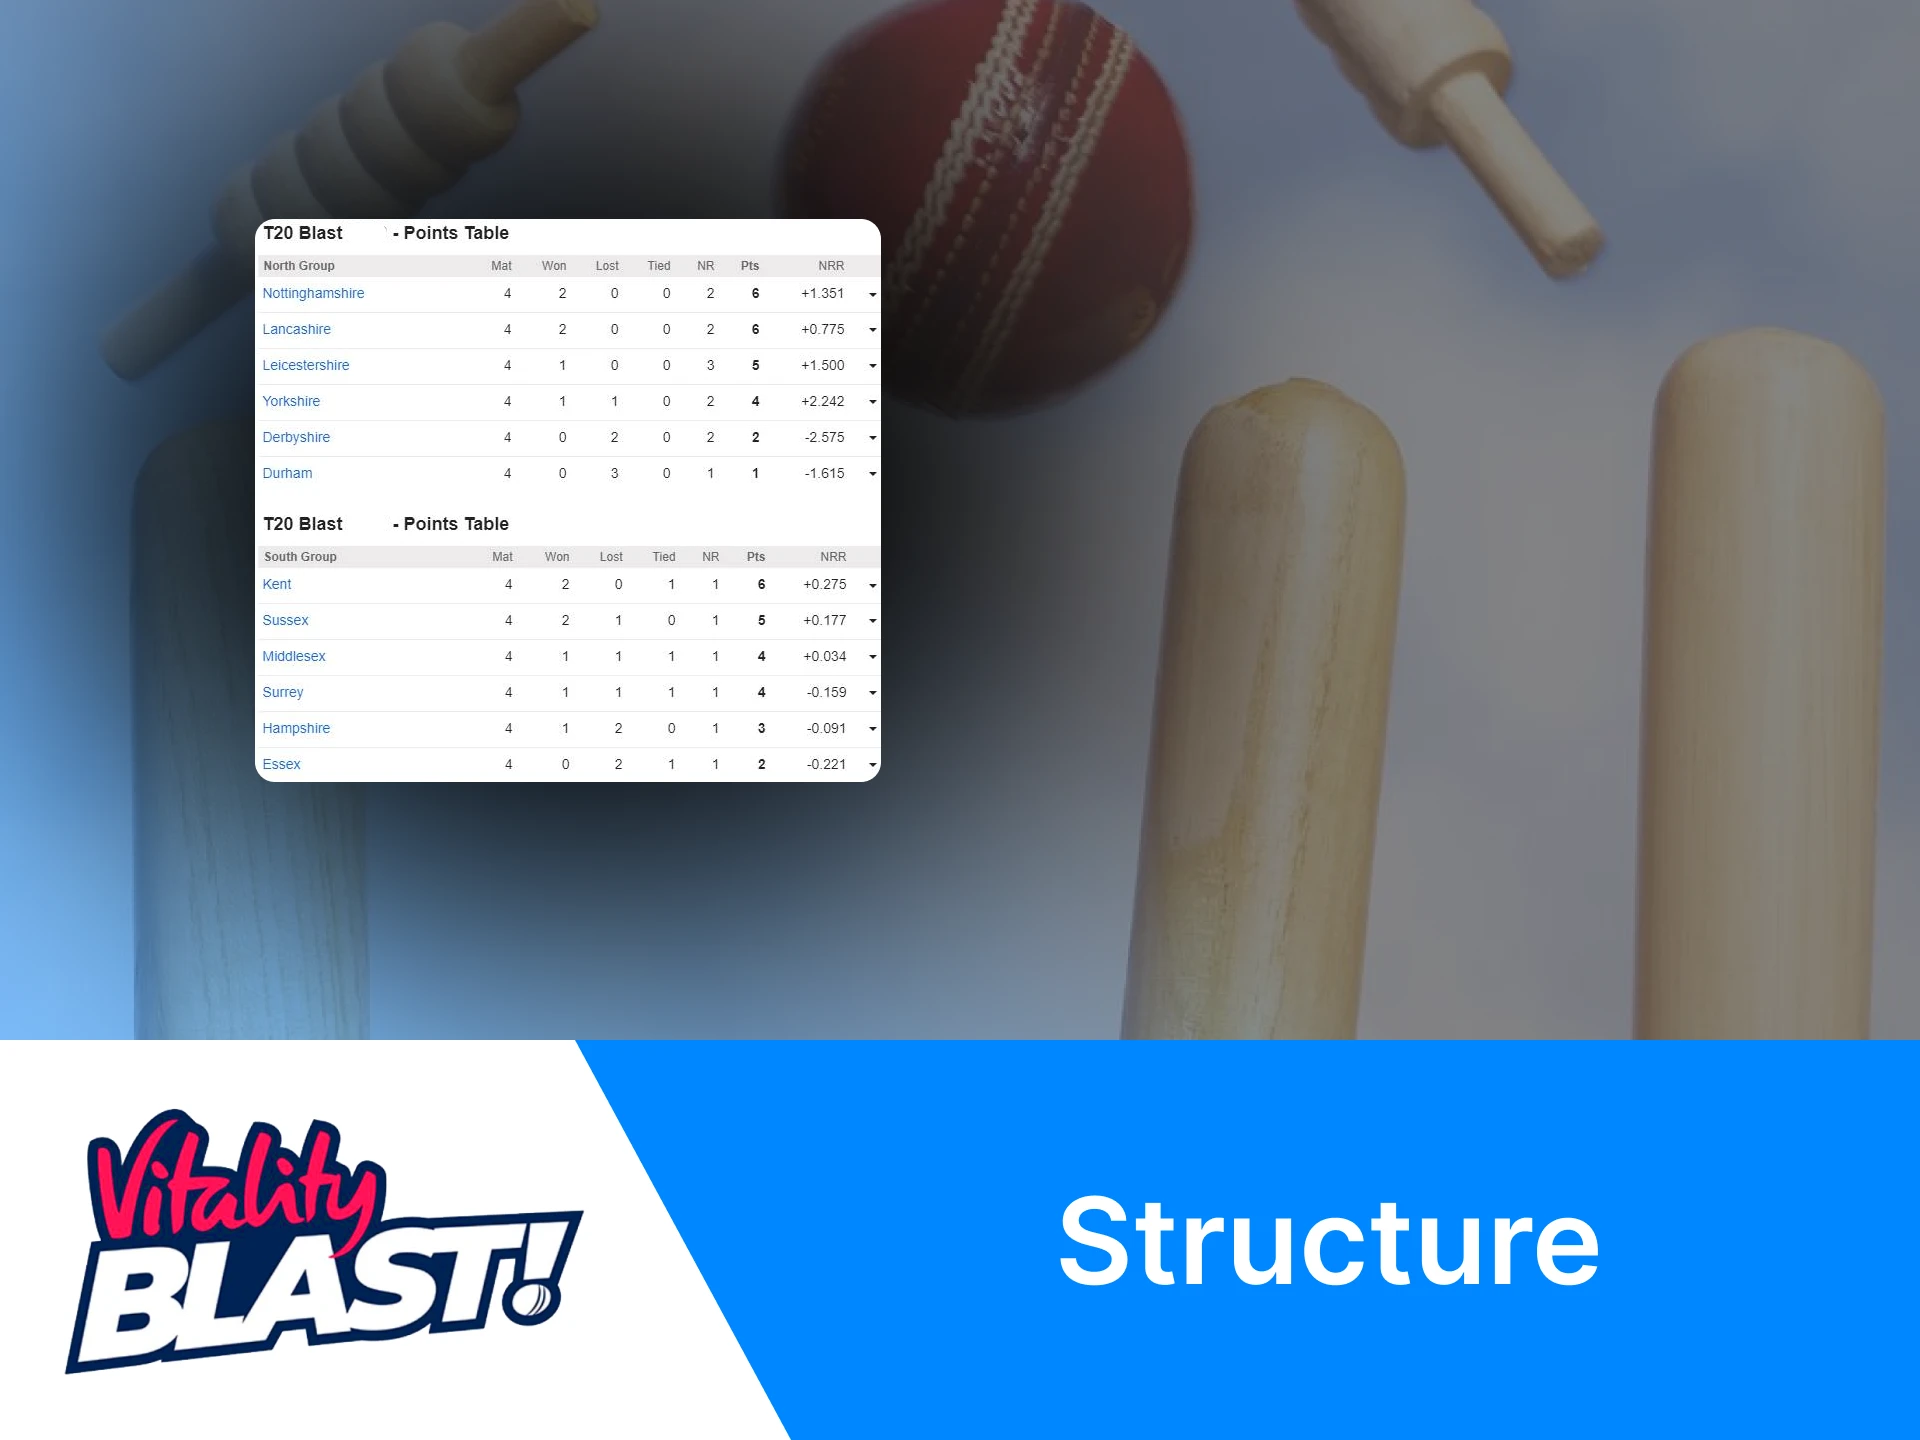 T20 Blast has a special structure.